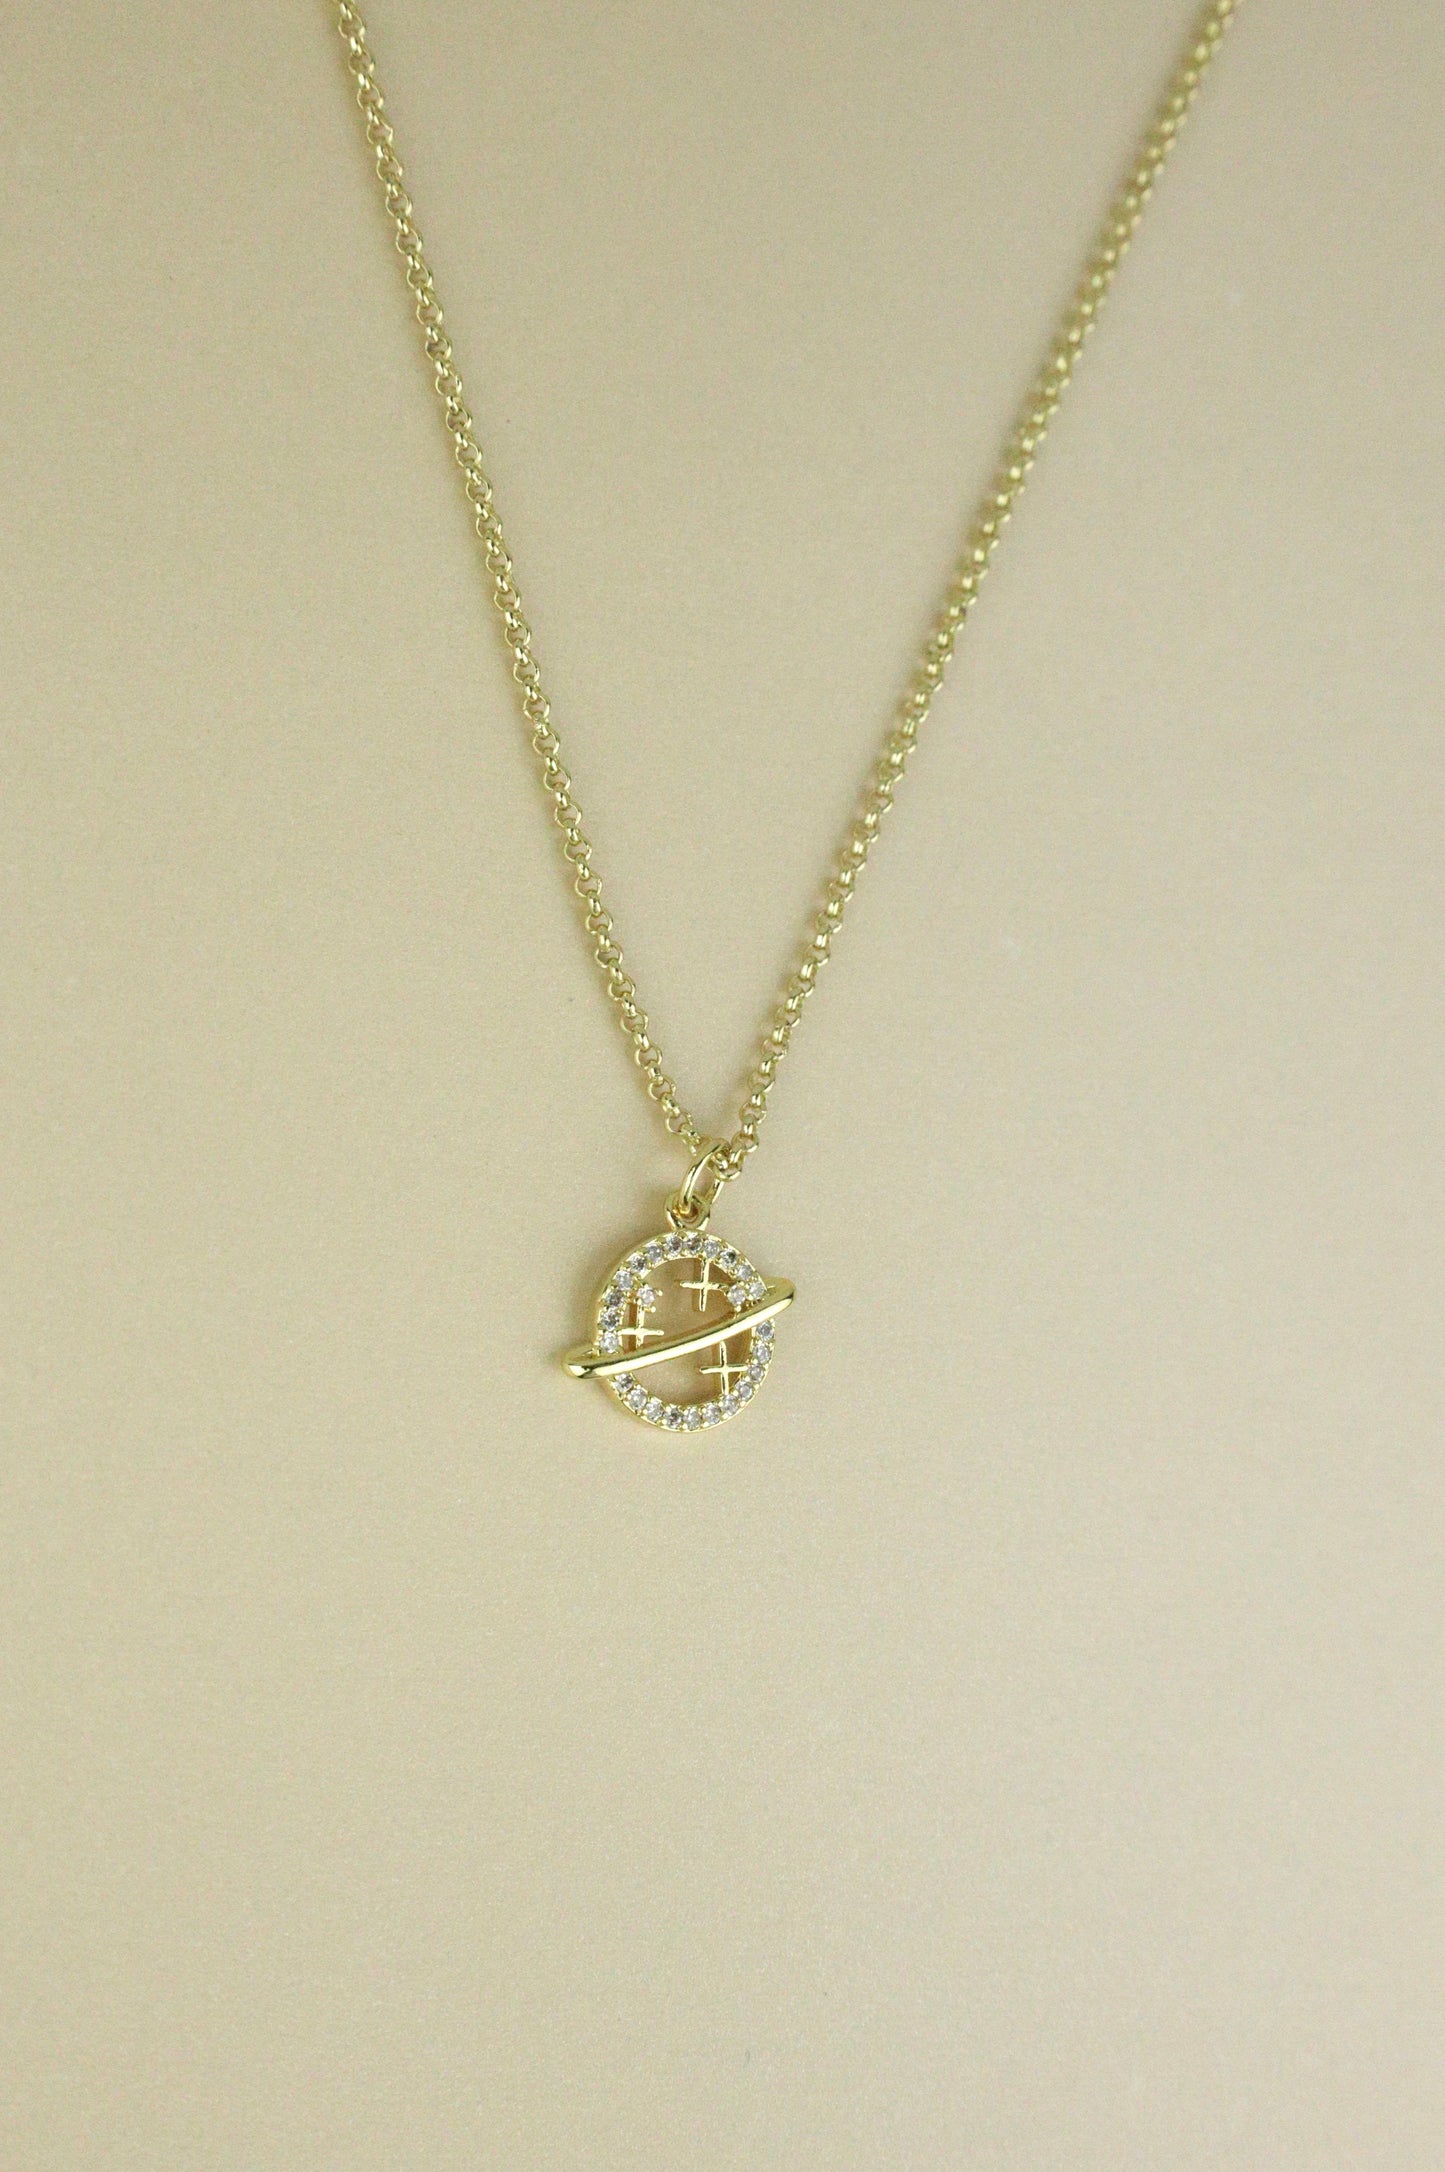 Celestial Saturn “Will Power” necklace